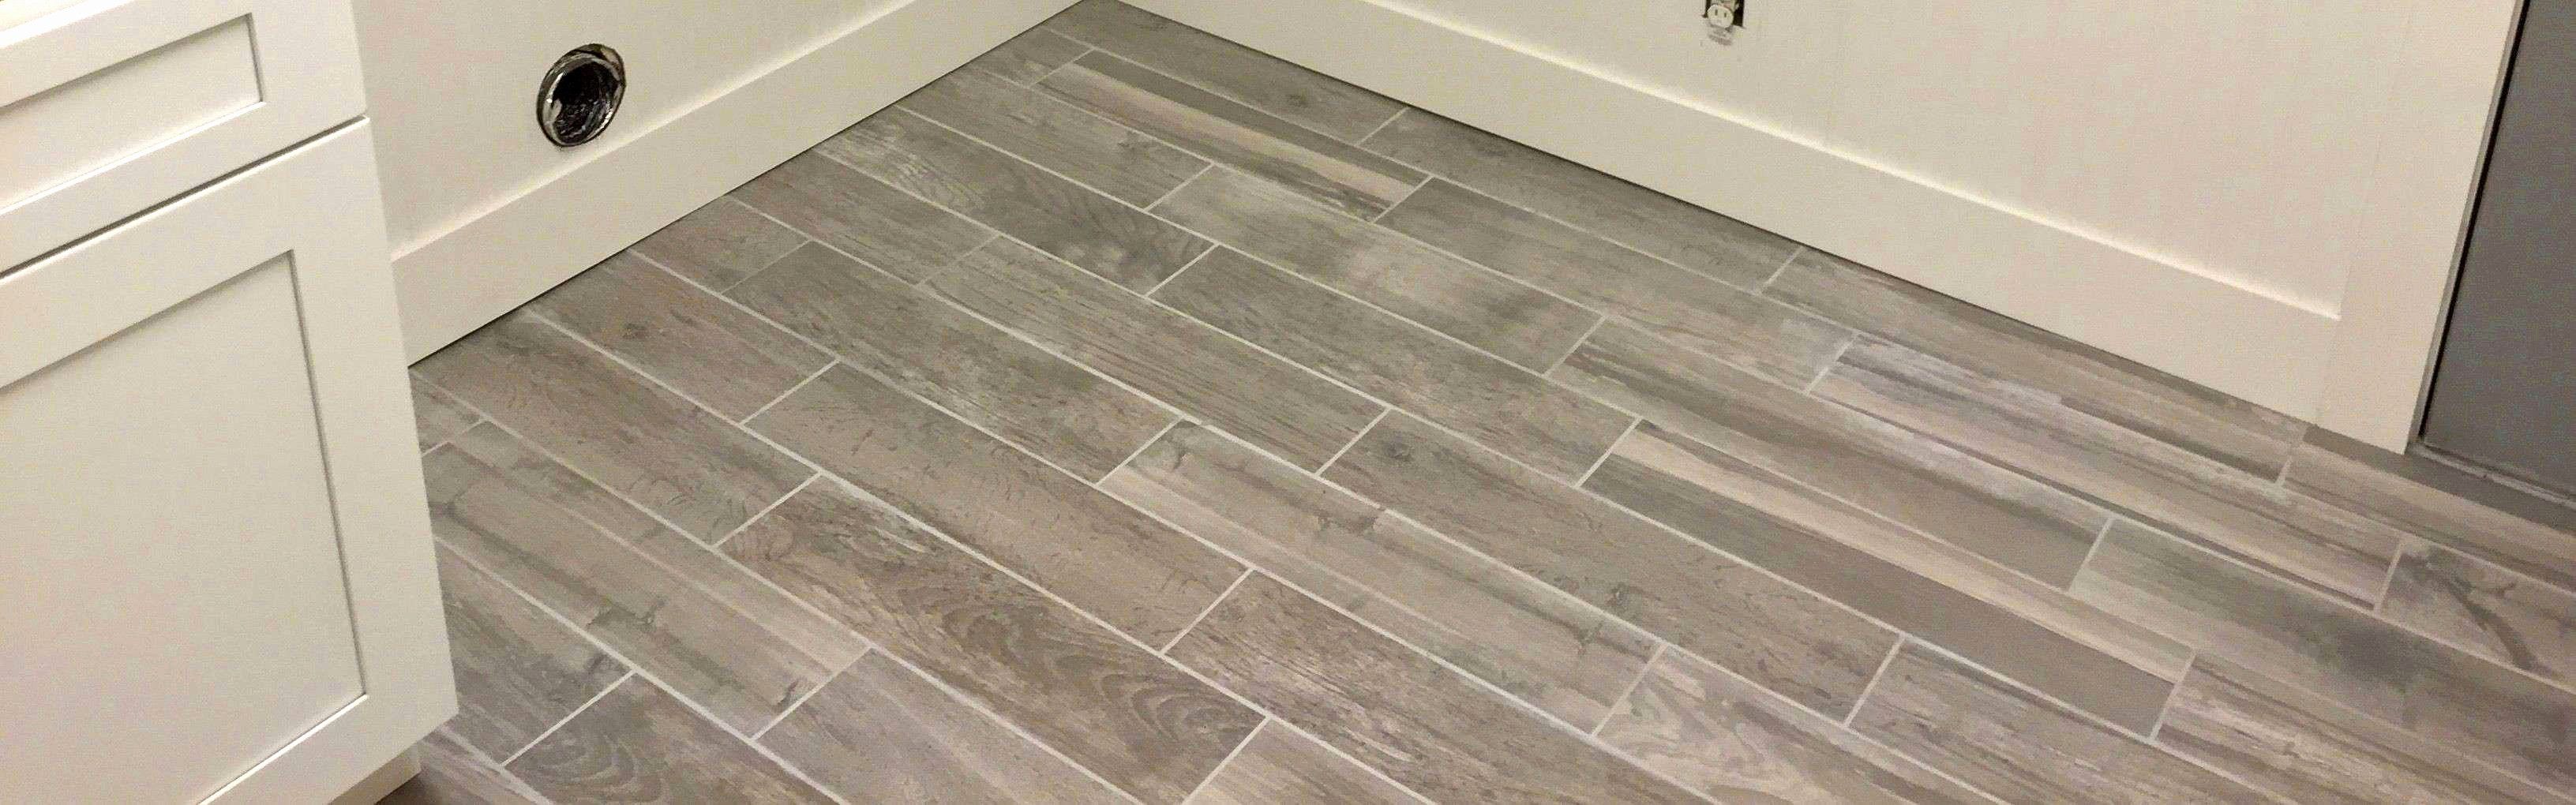 27 attractive How Difficult is It to Refinish Hardwood Floors 2023 free download how difficult is it to refinish hardwood floors of residential flooring installation 50 lovely how to get paint f within unique bathroom tiling ideas best h sink install bathroom i 0d exciti